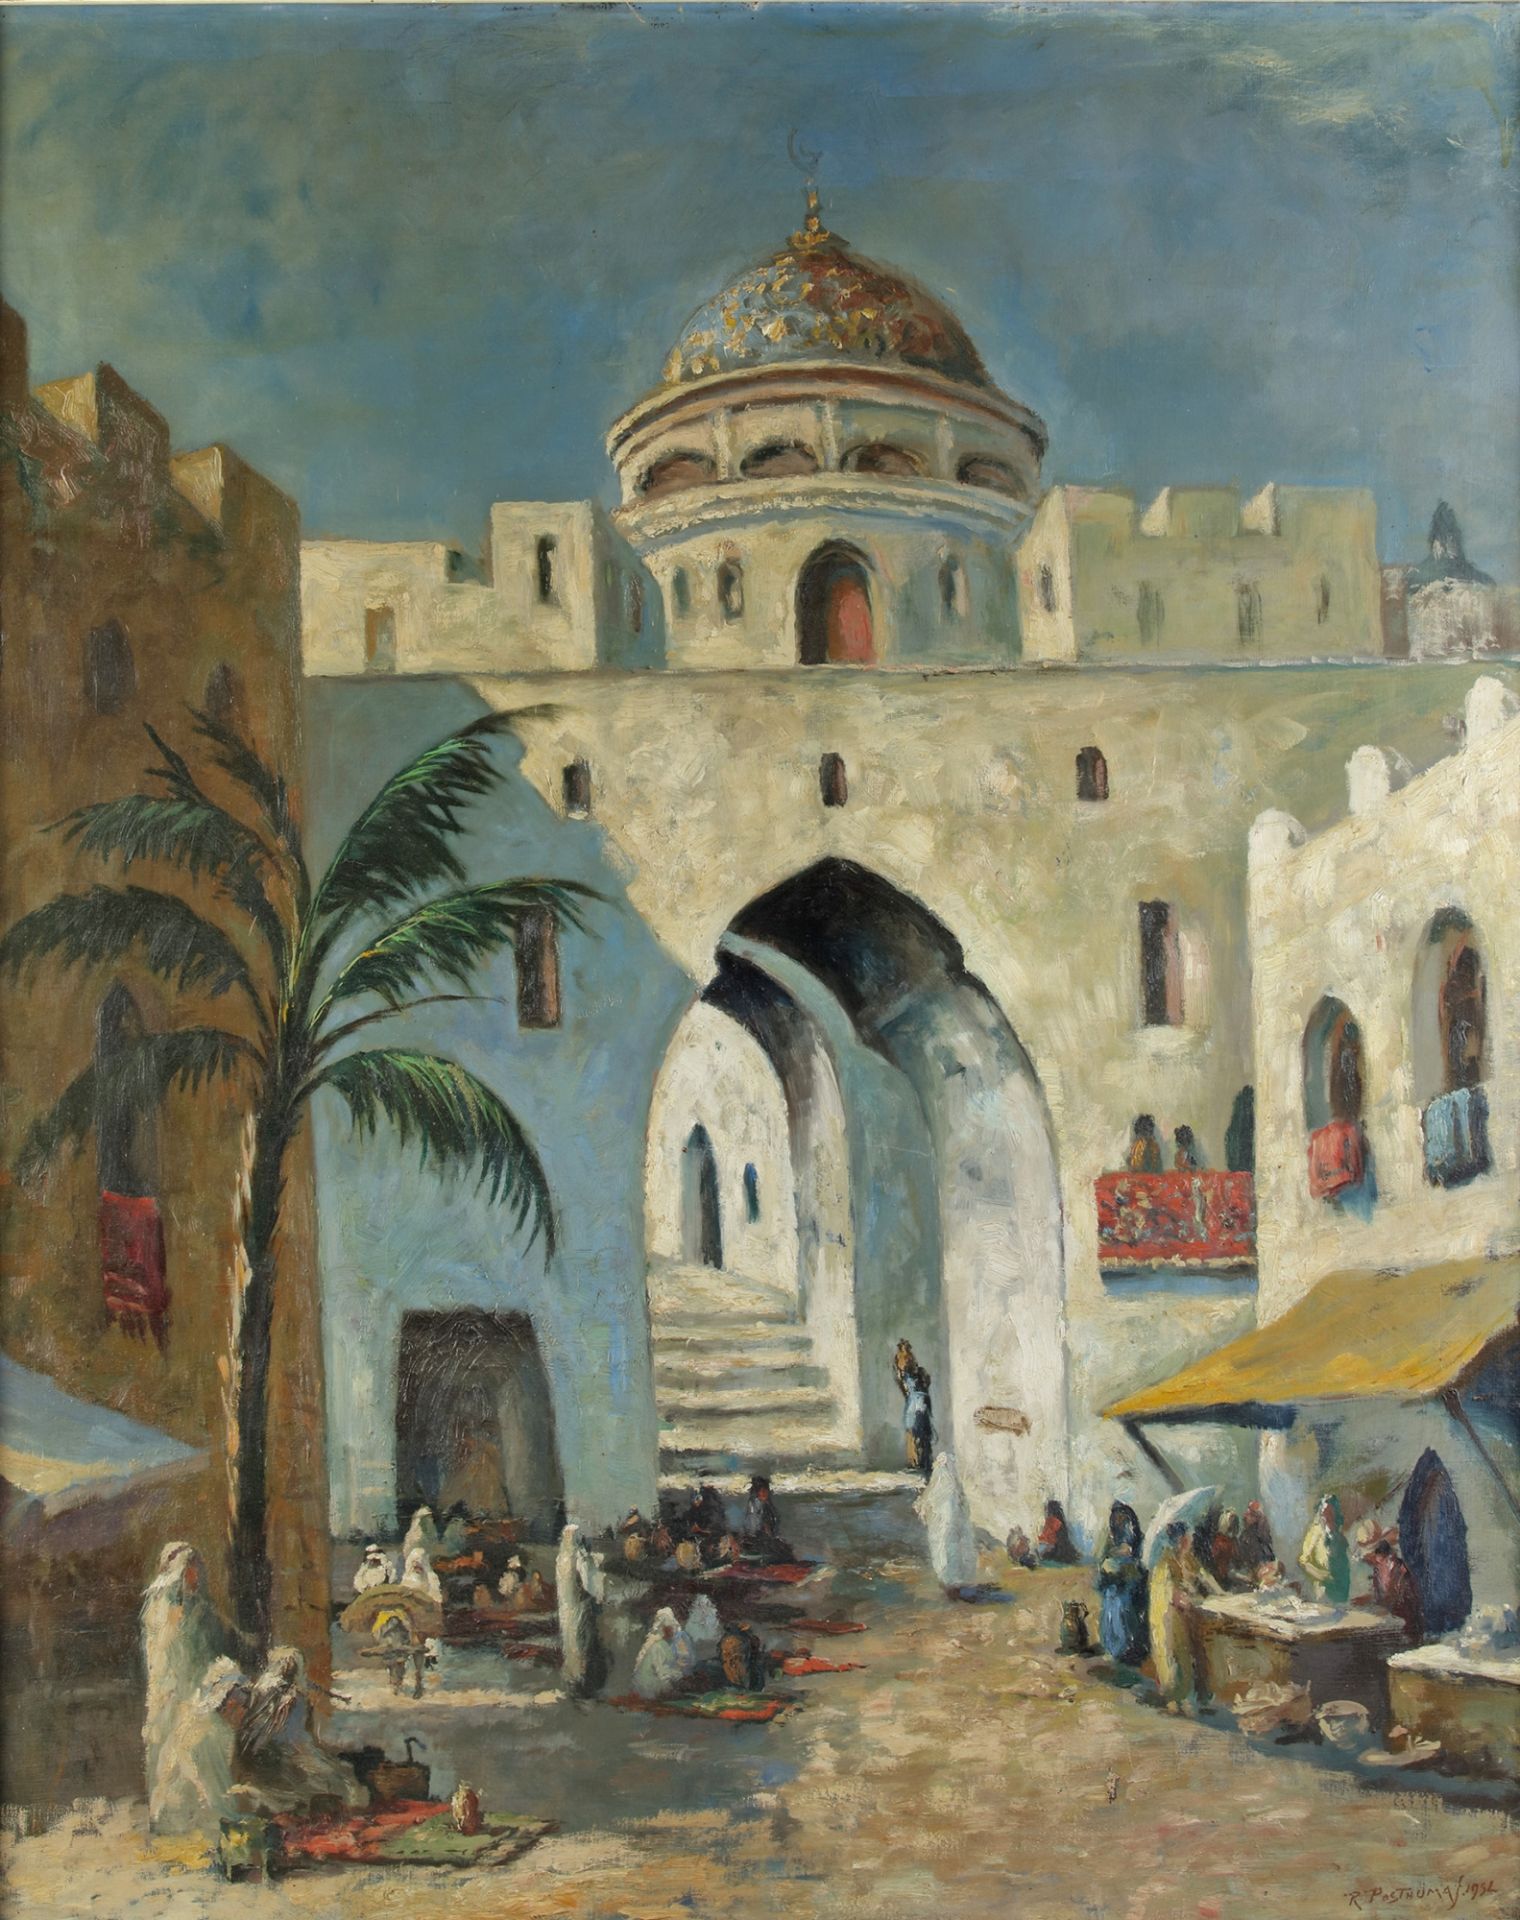 A painting depicting a market place with palm tree before a town-gate